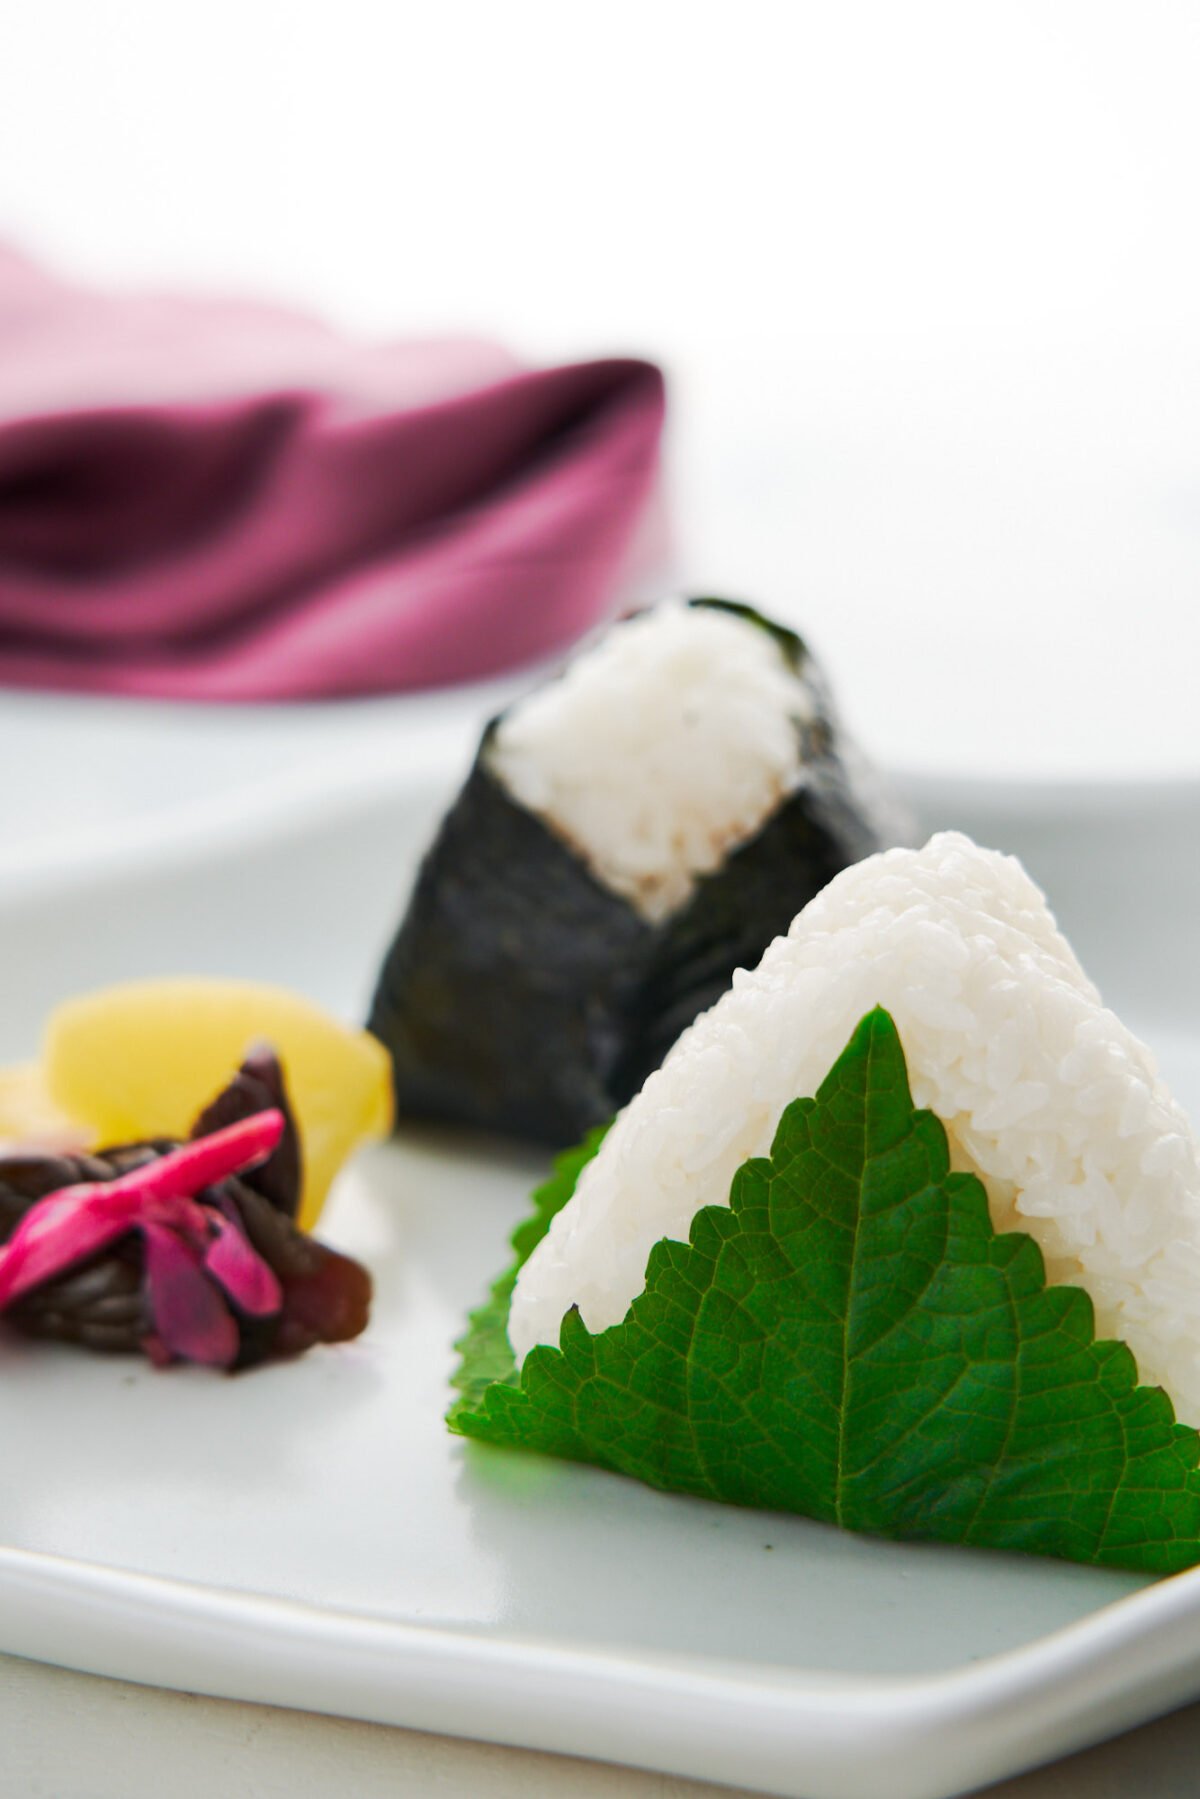 Tuna Mayo is a modern classic filling for onigiri rice balls that can be made with just canned tuna, mayonnaise and soy sauce. Learn everything you need to know to make these triangular Tuna Mayo Onigiri with this recipe.